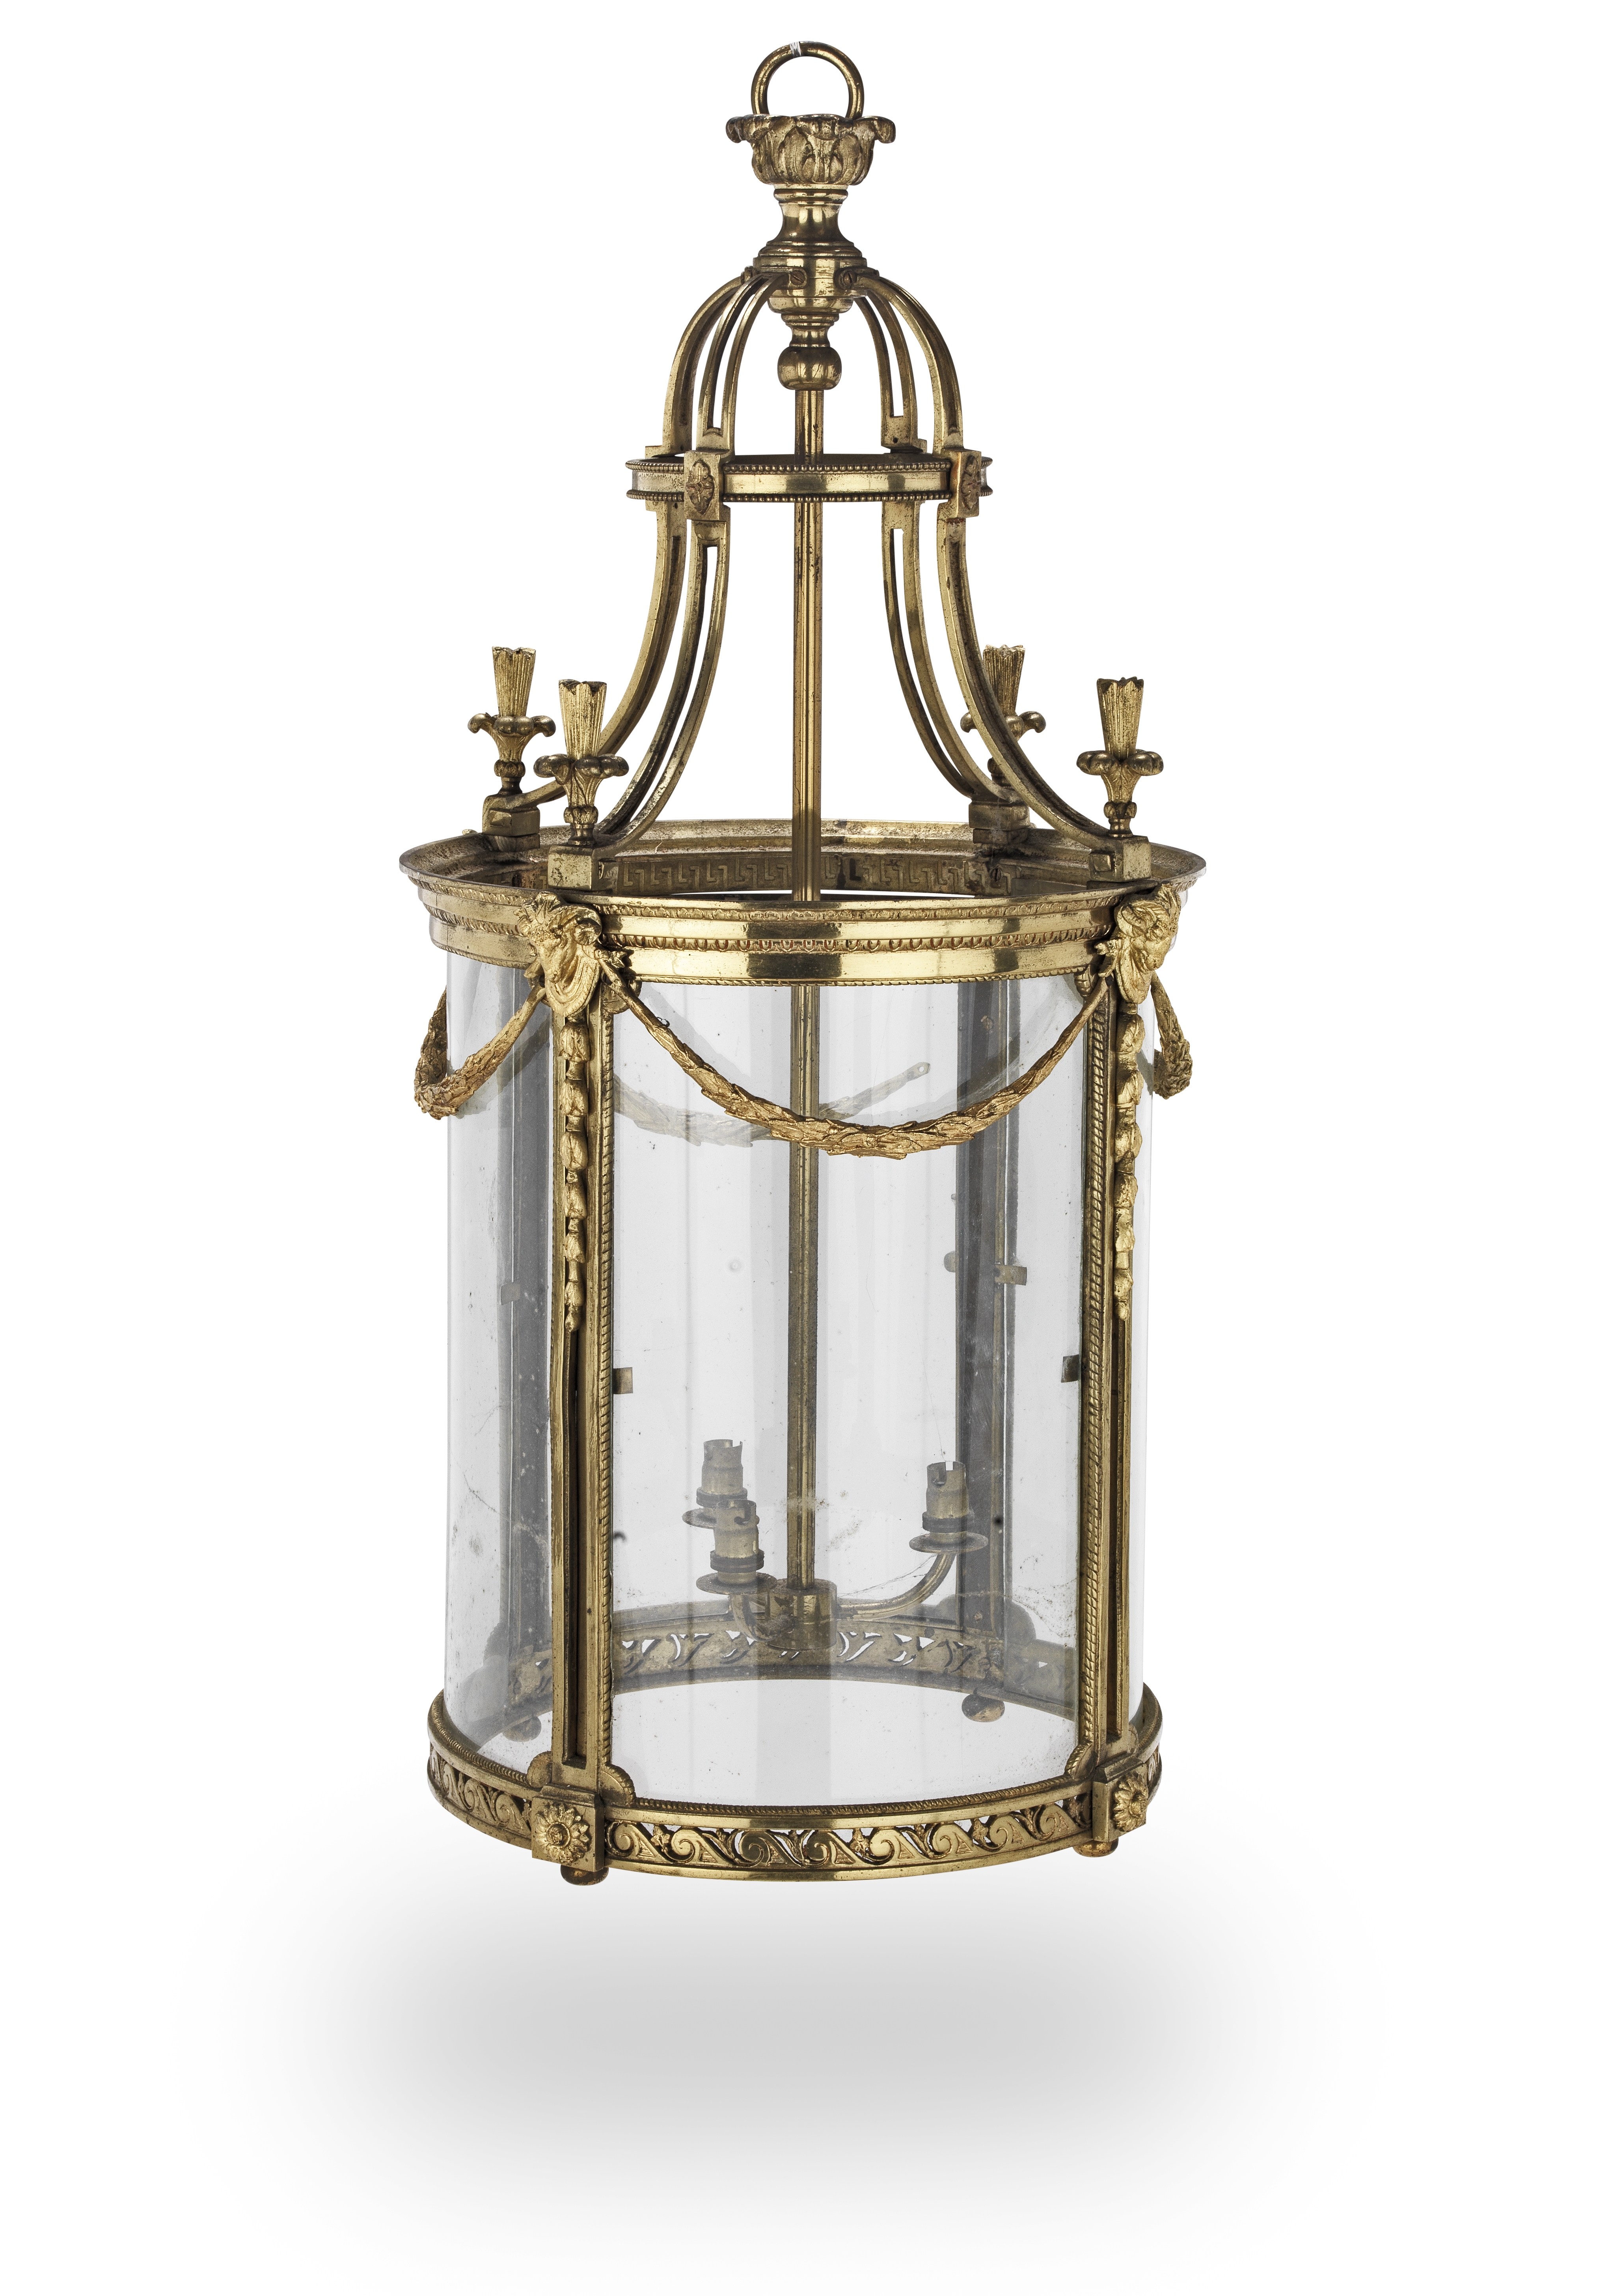 A late 19th/early 20th century gilt bronze hall lantern in the Louis XVI style